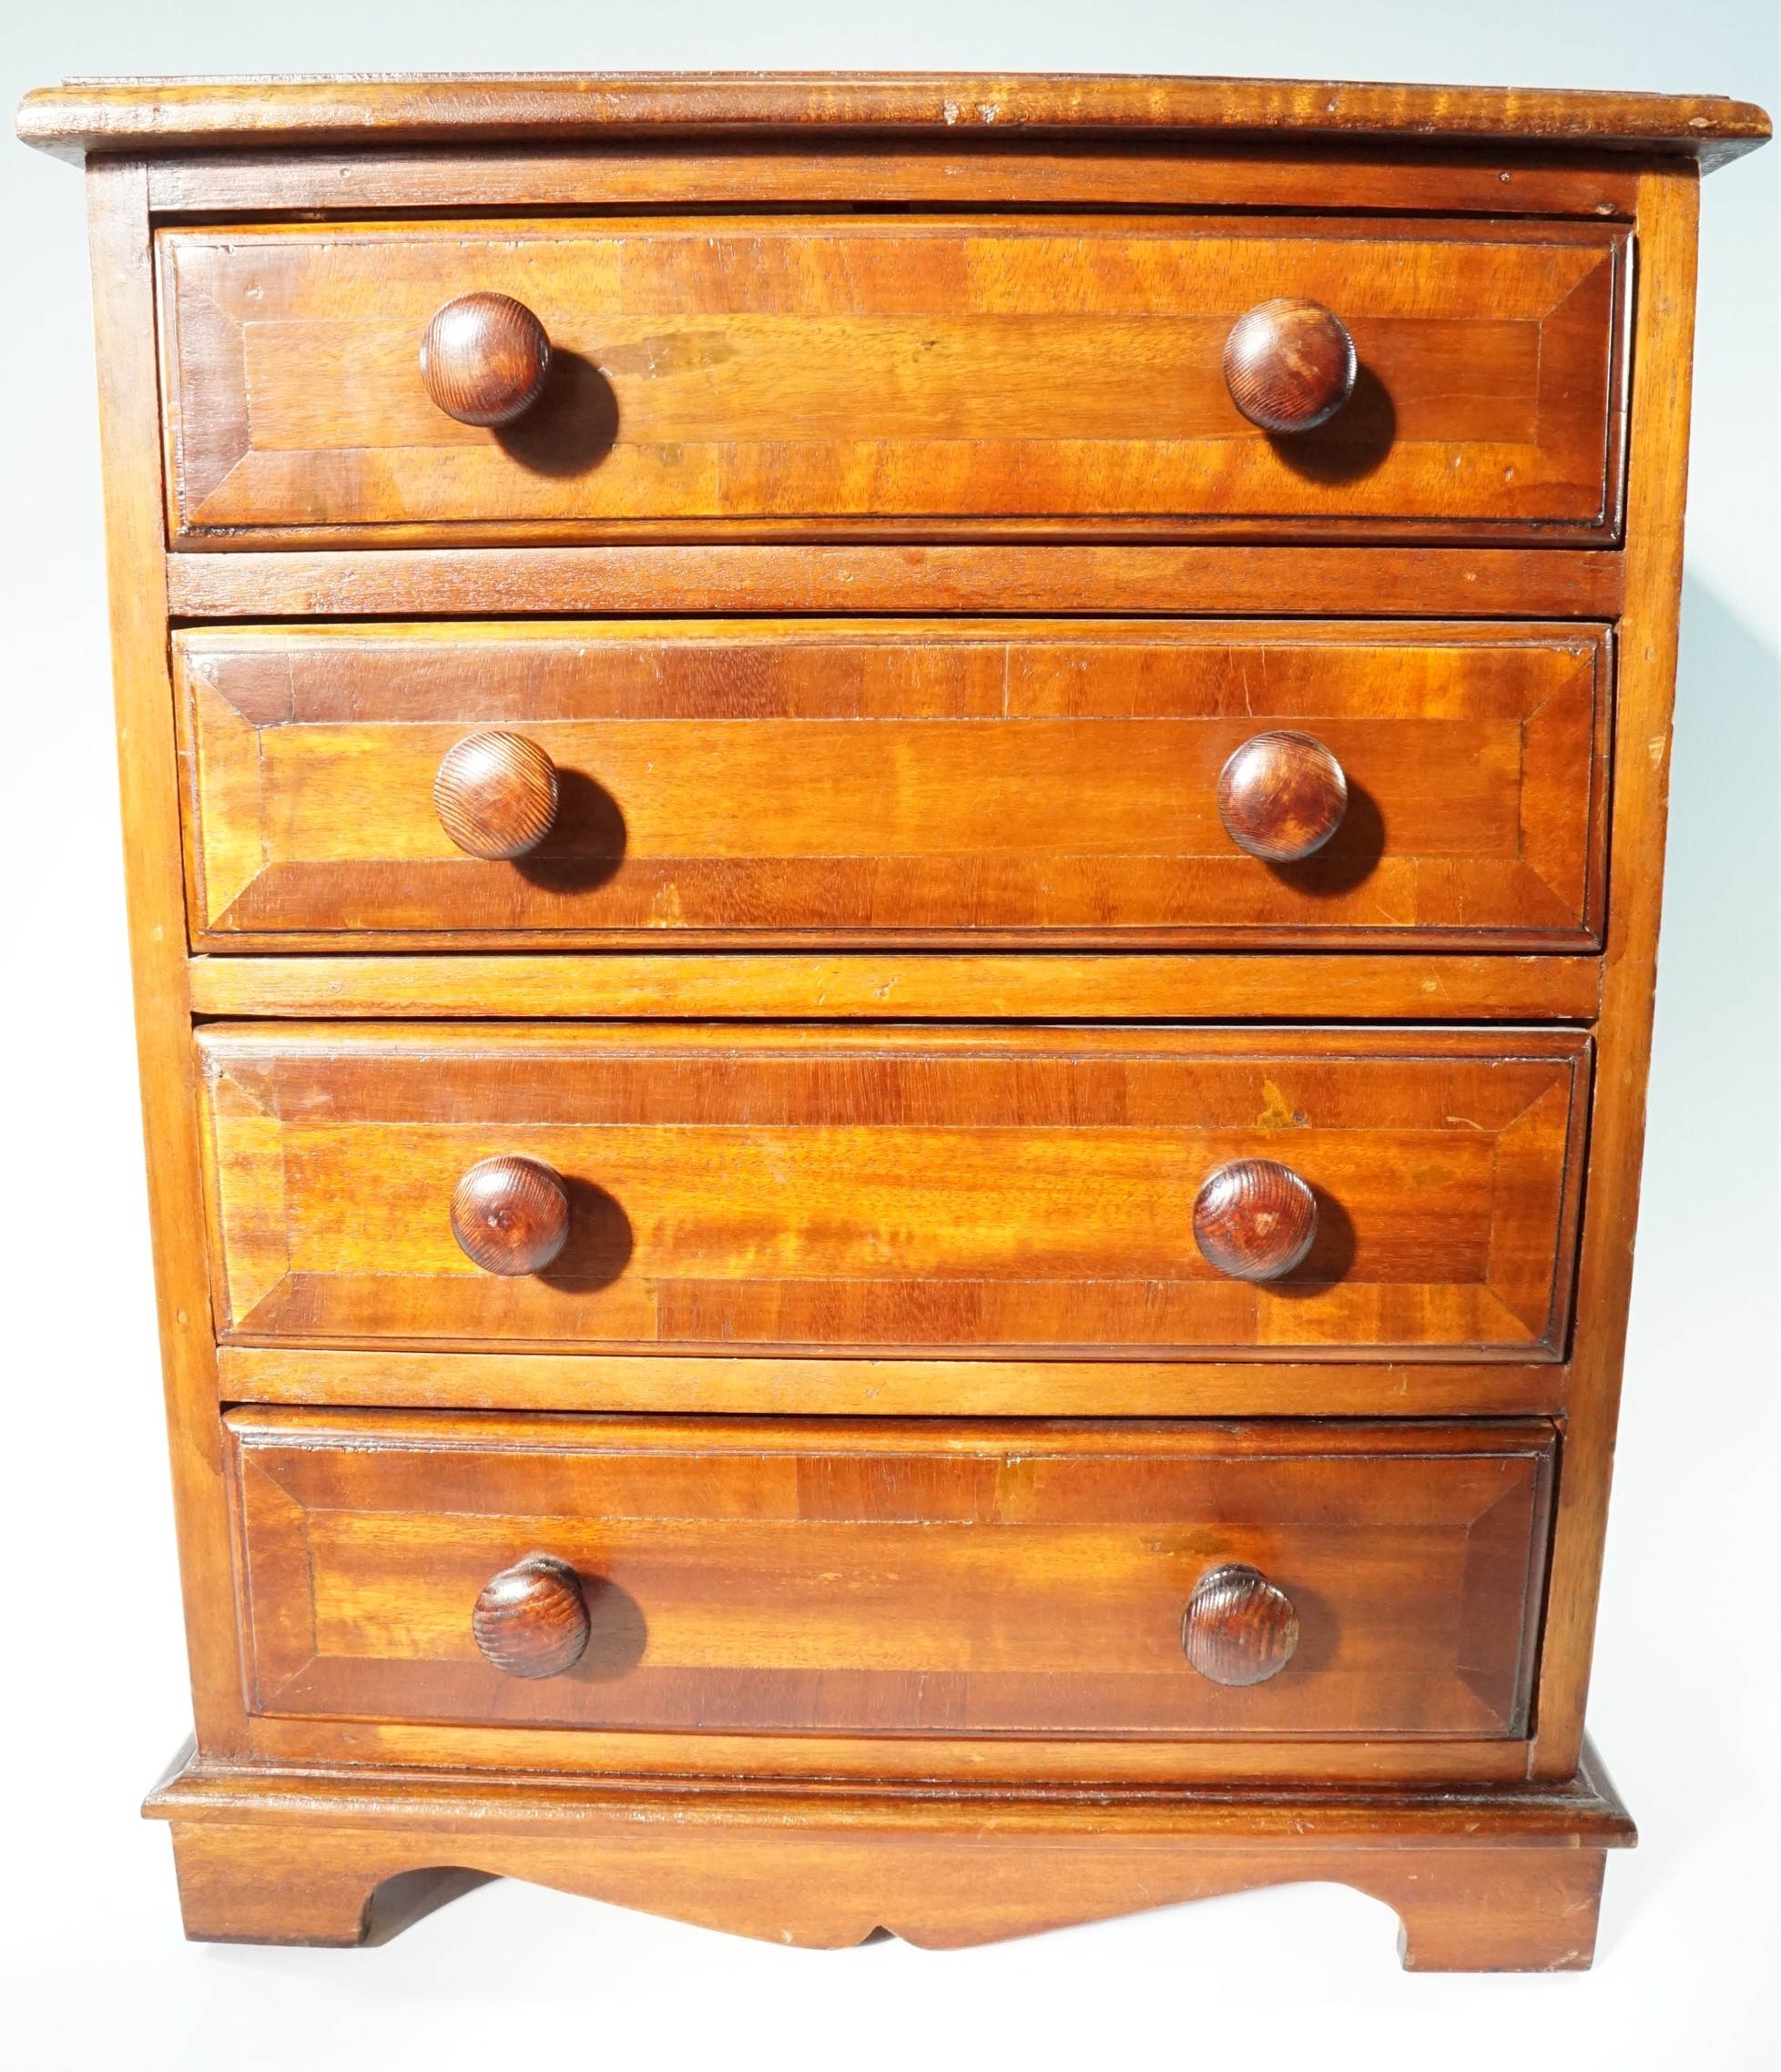 A miniature early 19th Century style mahogany cross-banded chest of drawers, 43 cm x 29 cm x 53 cm